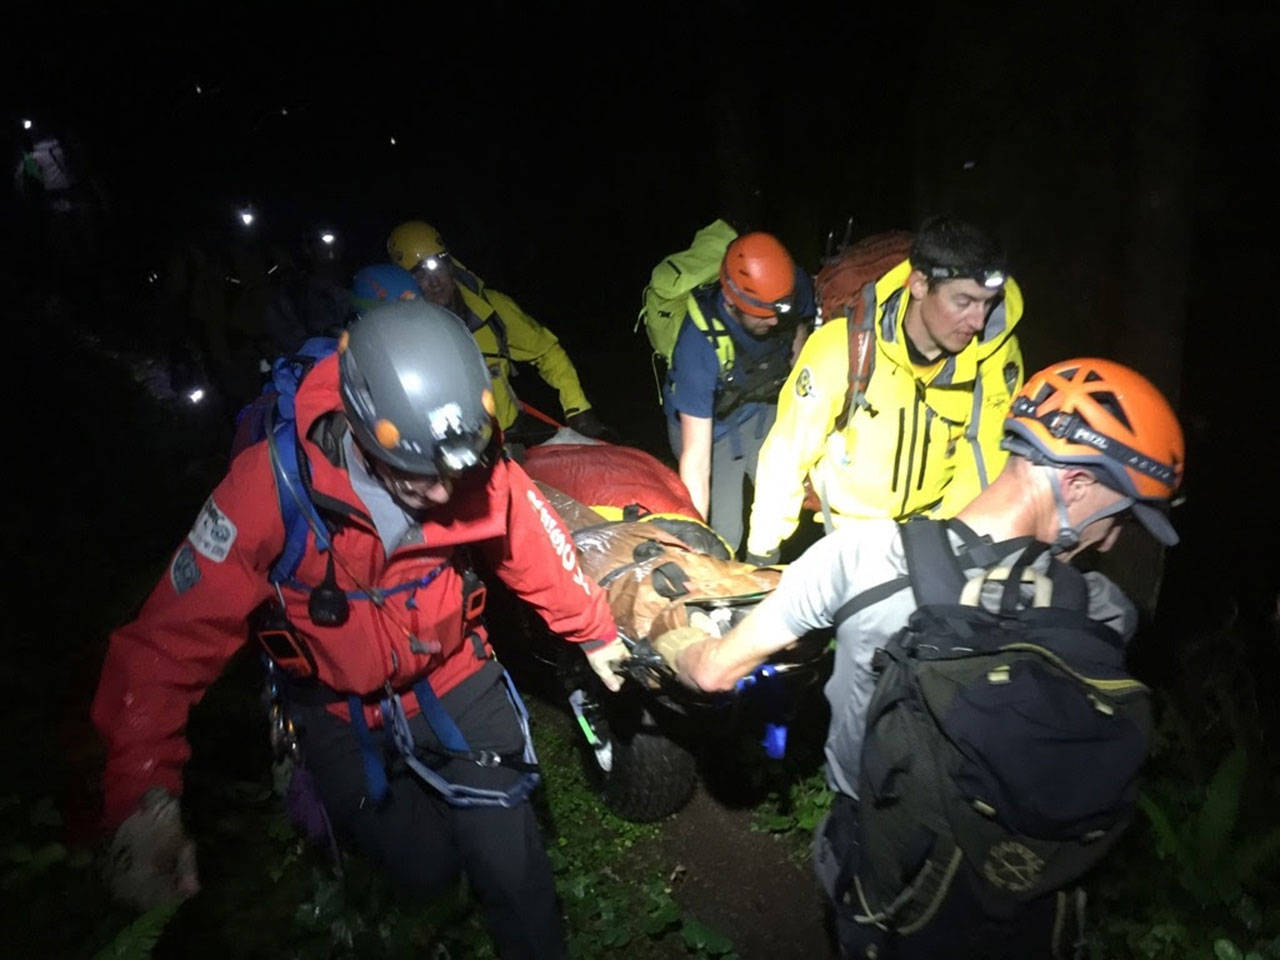 The Clallam County Search and Rescue Team along with Olympic Mountain Rescue extricated Robert Sawyer of Neah Bay, 40, from a ravine about 4.5 miles up the Little River Trail south of Port Angeles on Friday night. (Clallam County Sheriff Search and Rescue Team)